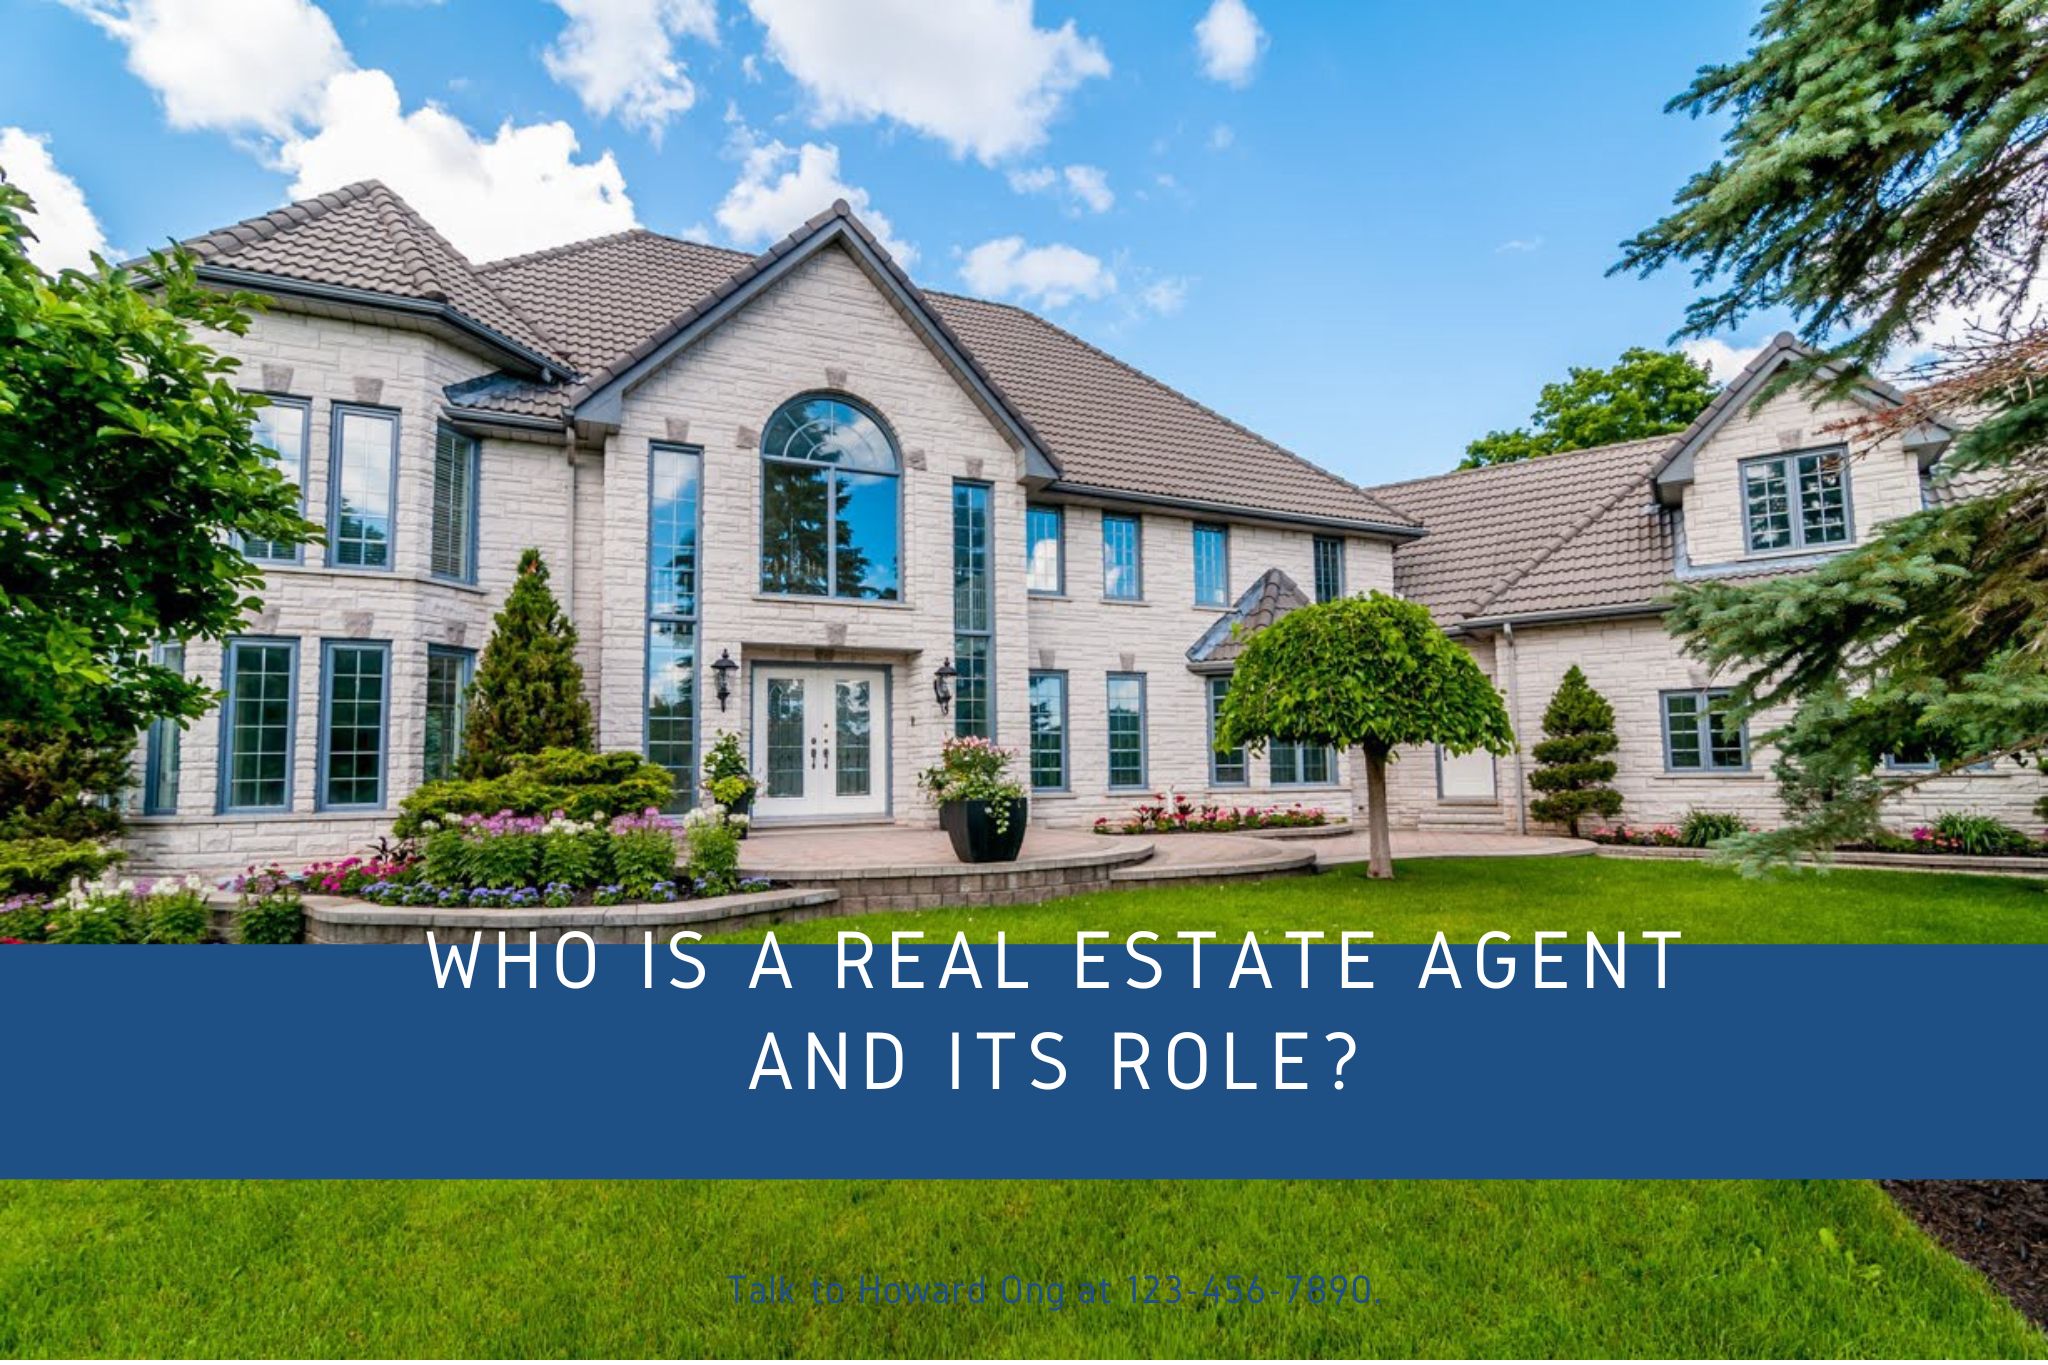 What is the Role of Real Estate Agent?